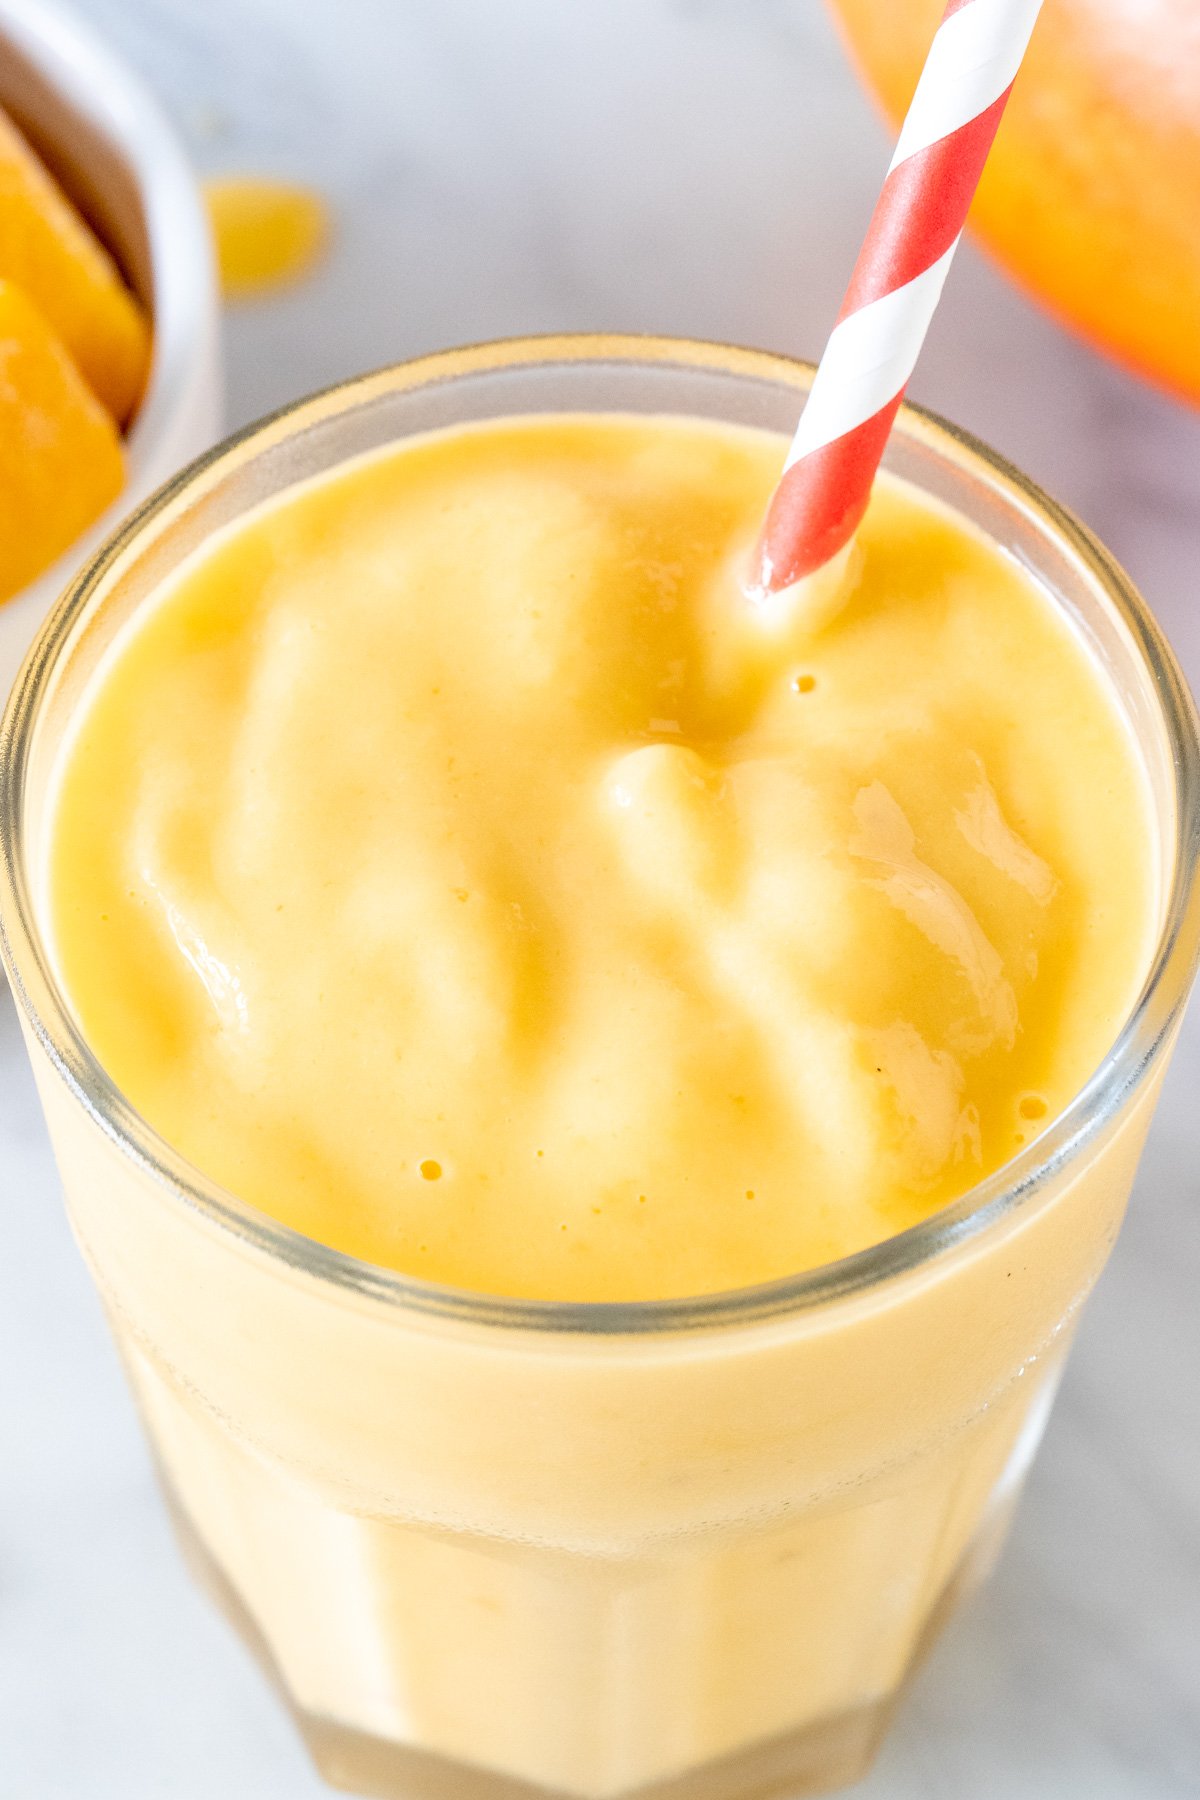 Thick mango smoothie in a glass, red and white straw, sliced mango fruit